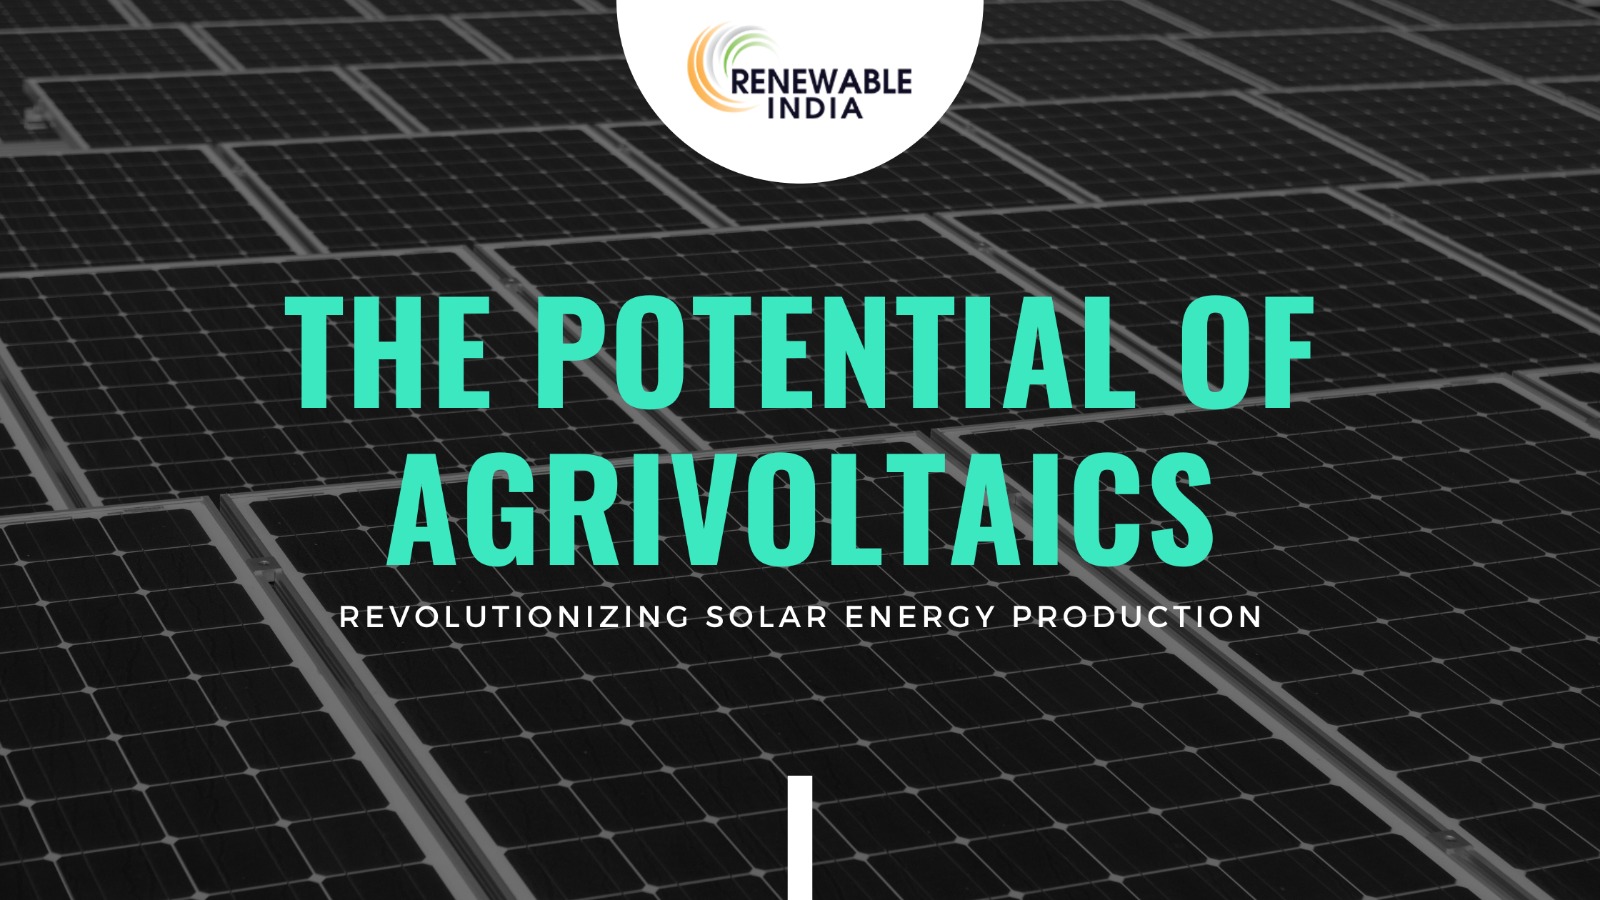 The Bright Future of Solar Energy – Overcoming Hurdles with Agrivoltaics